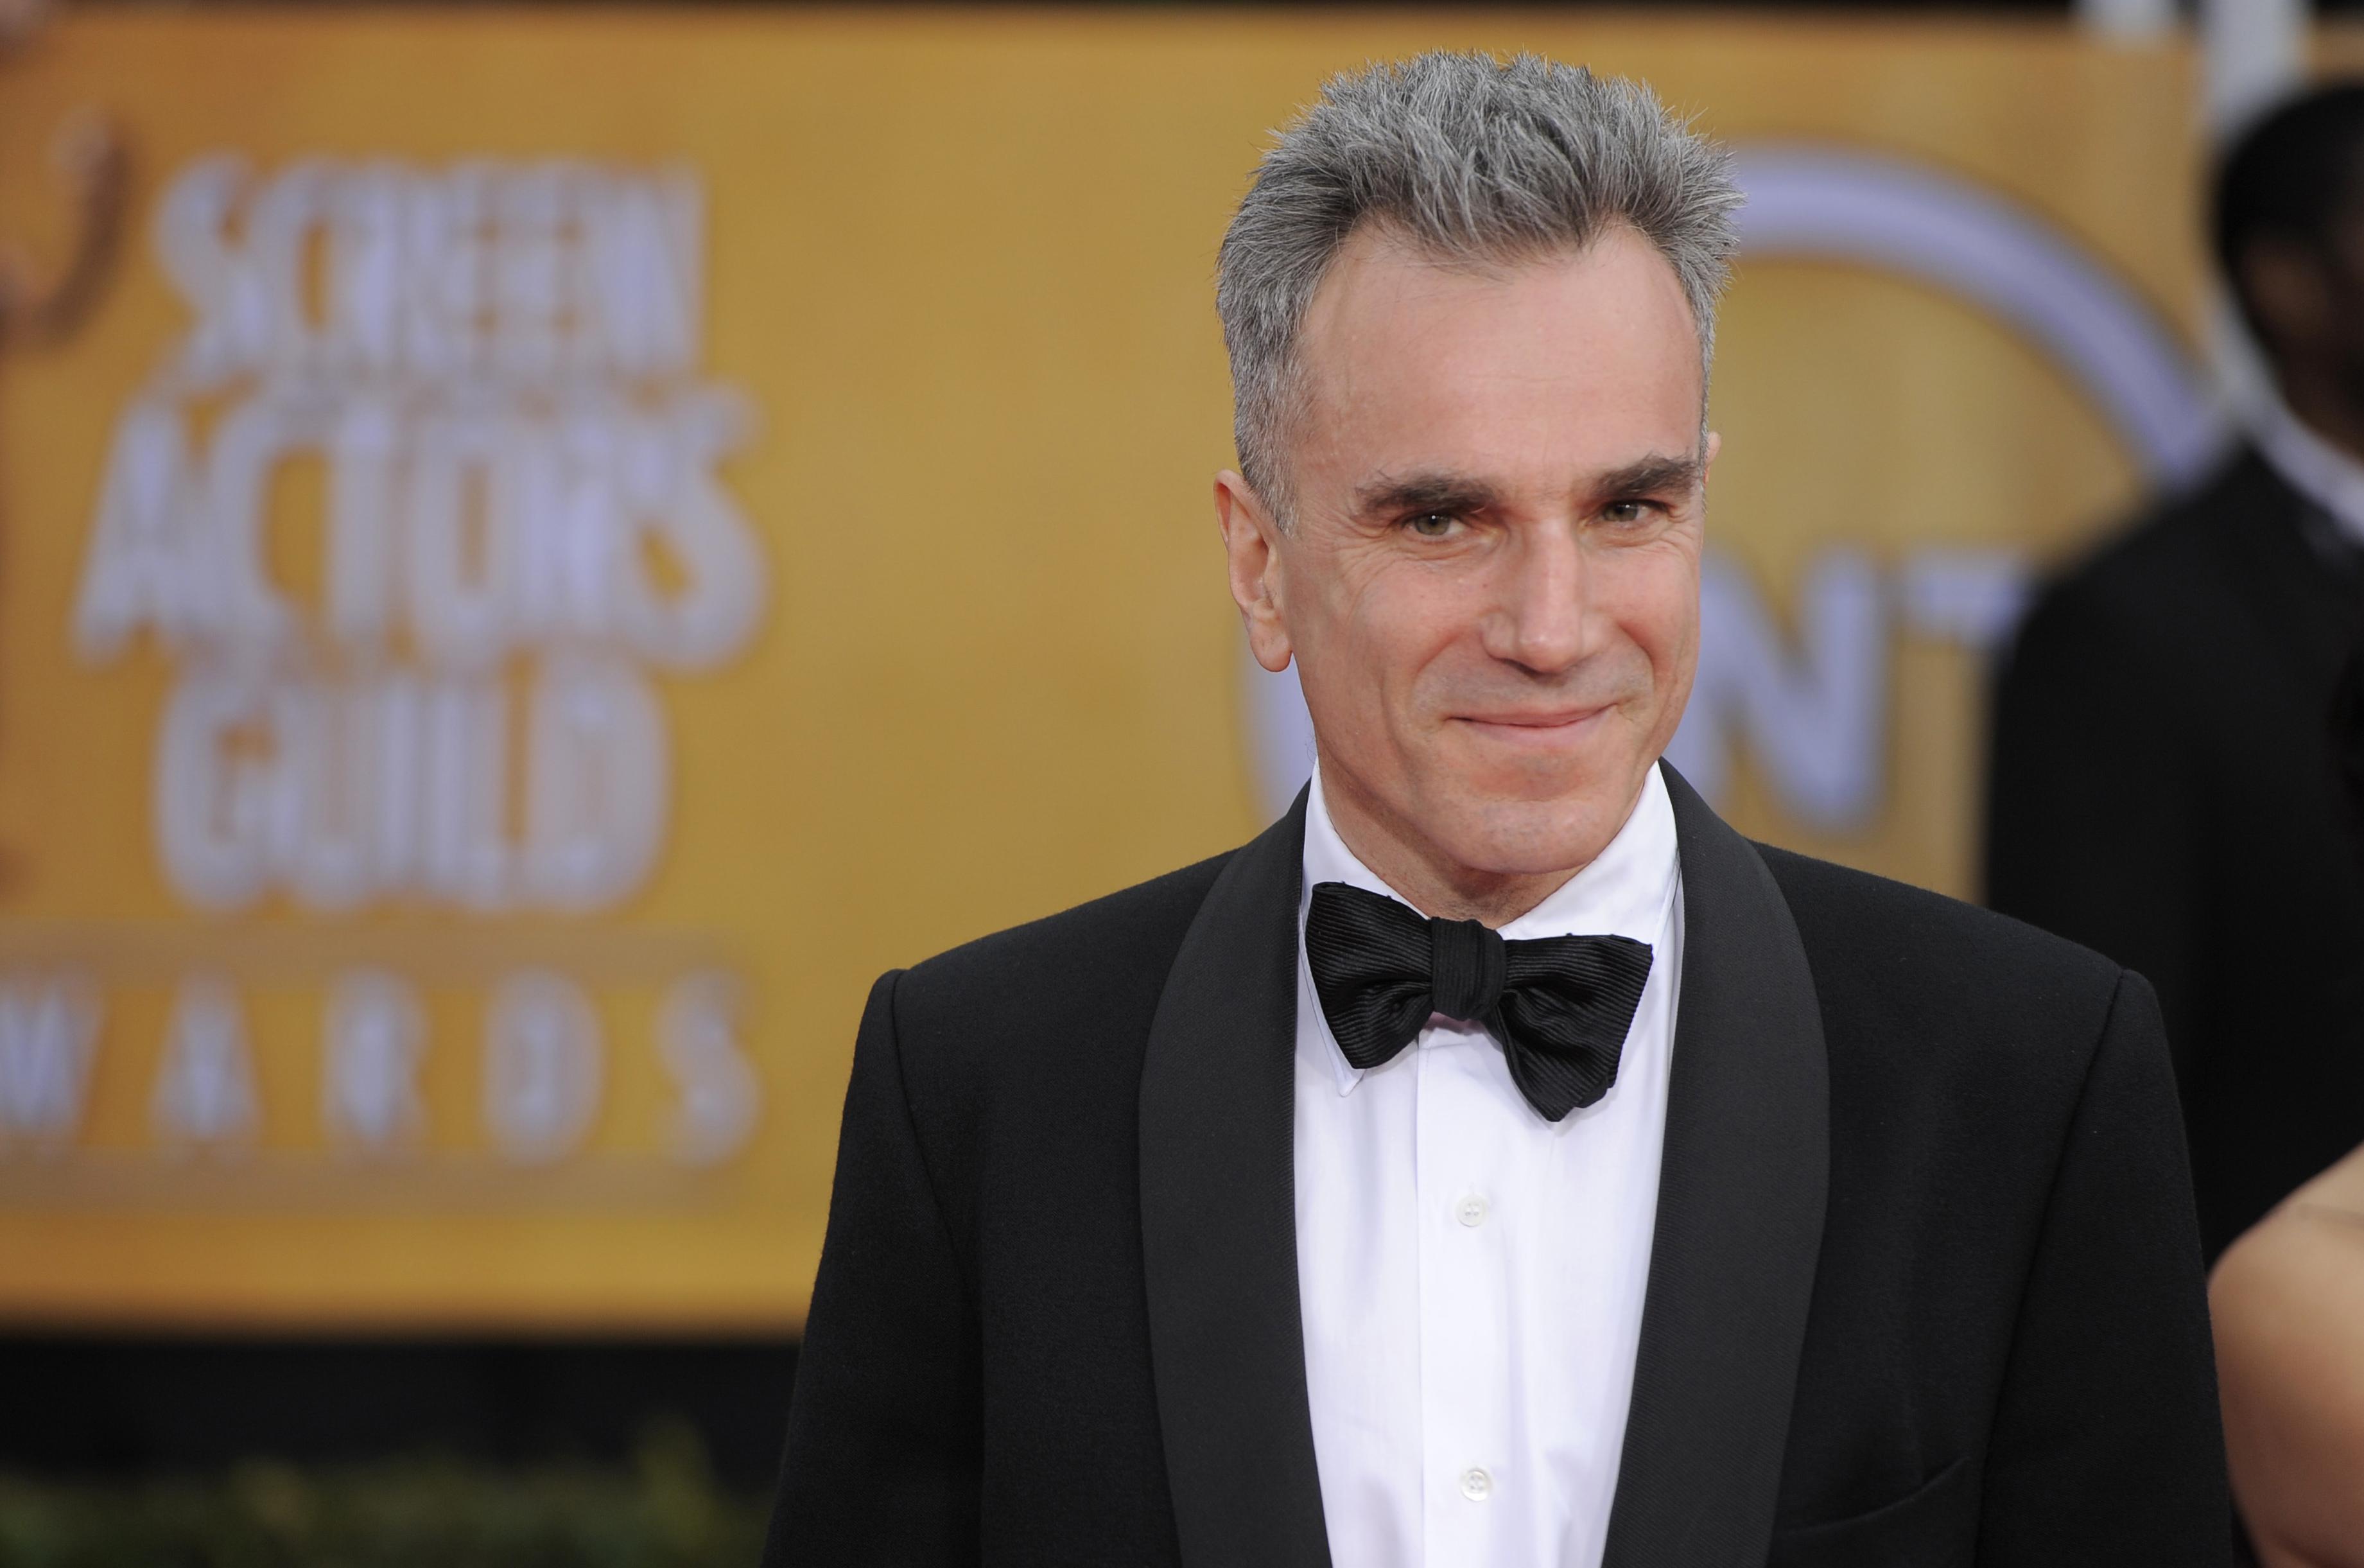 Daniel Day-Lewis says he’s retiring from acting | The Spokesman-Review